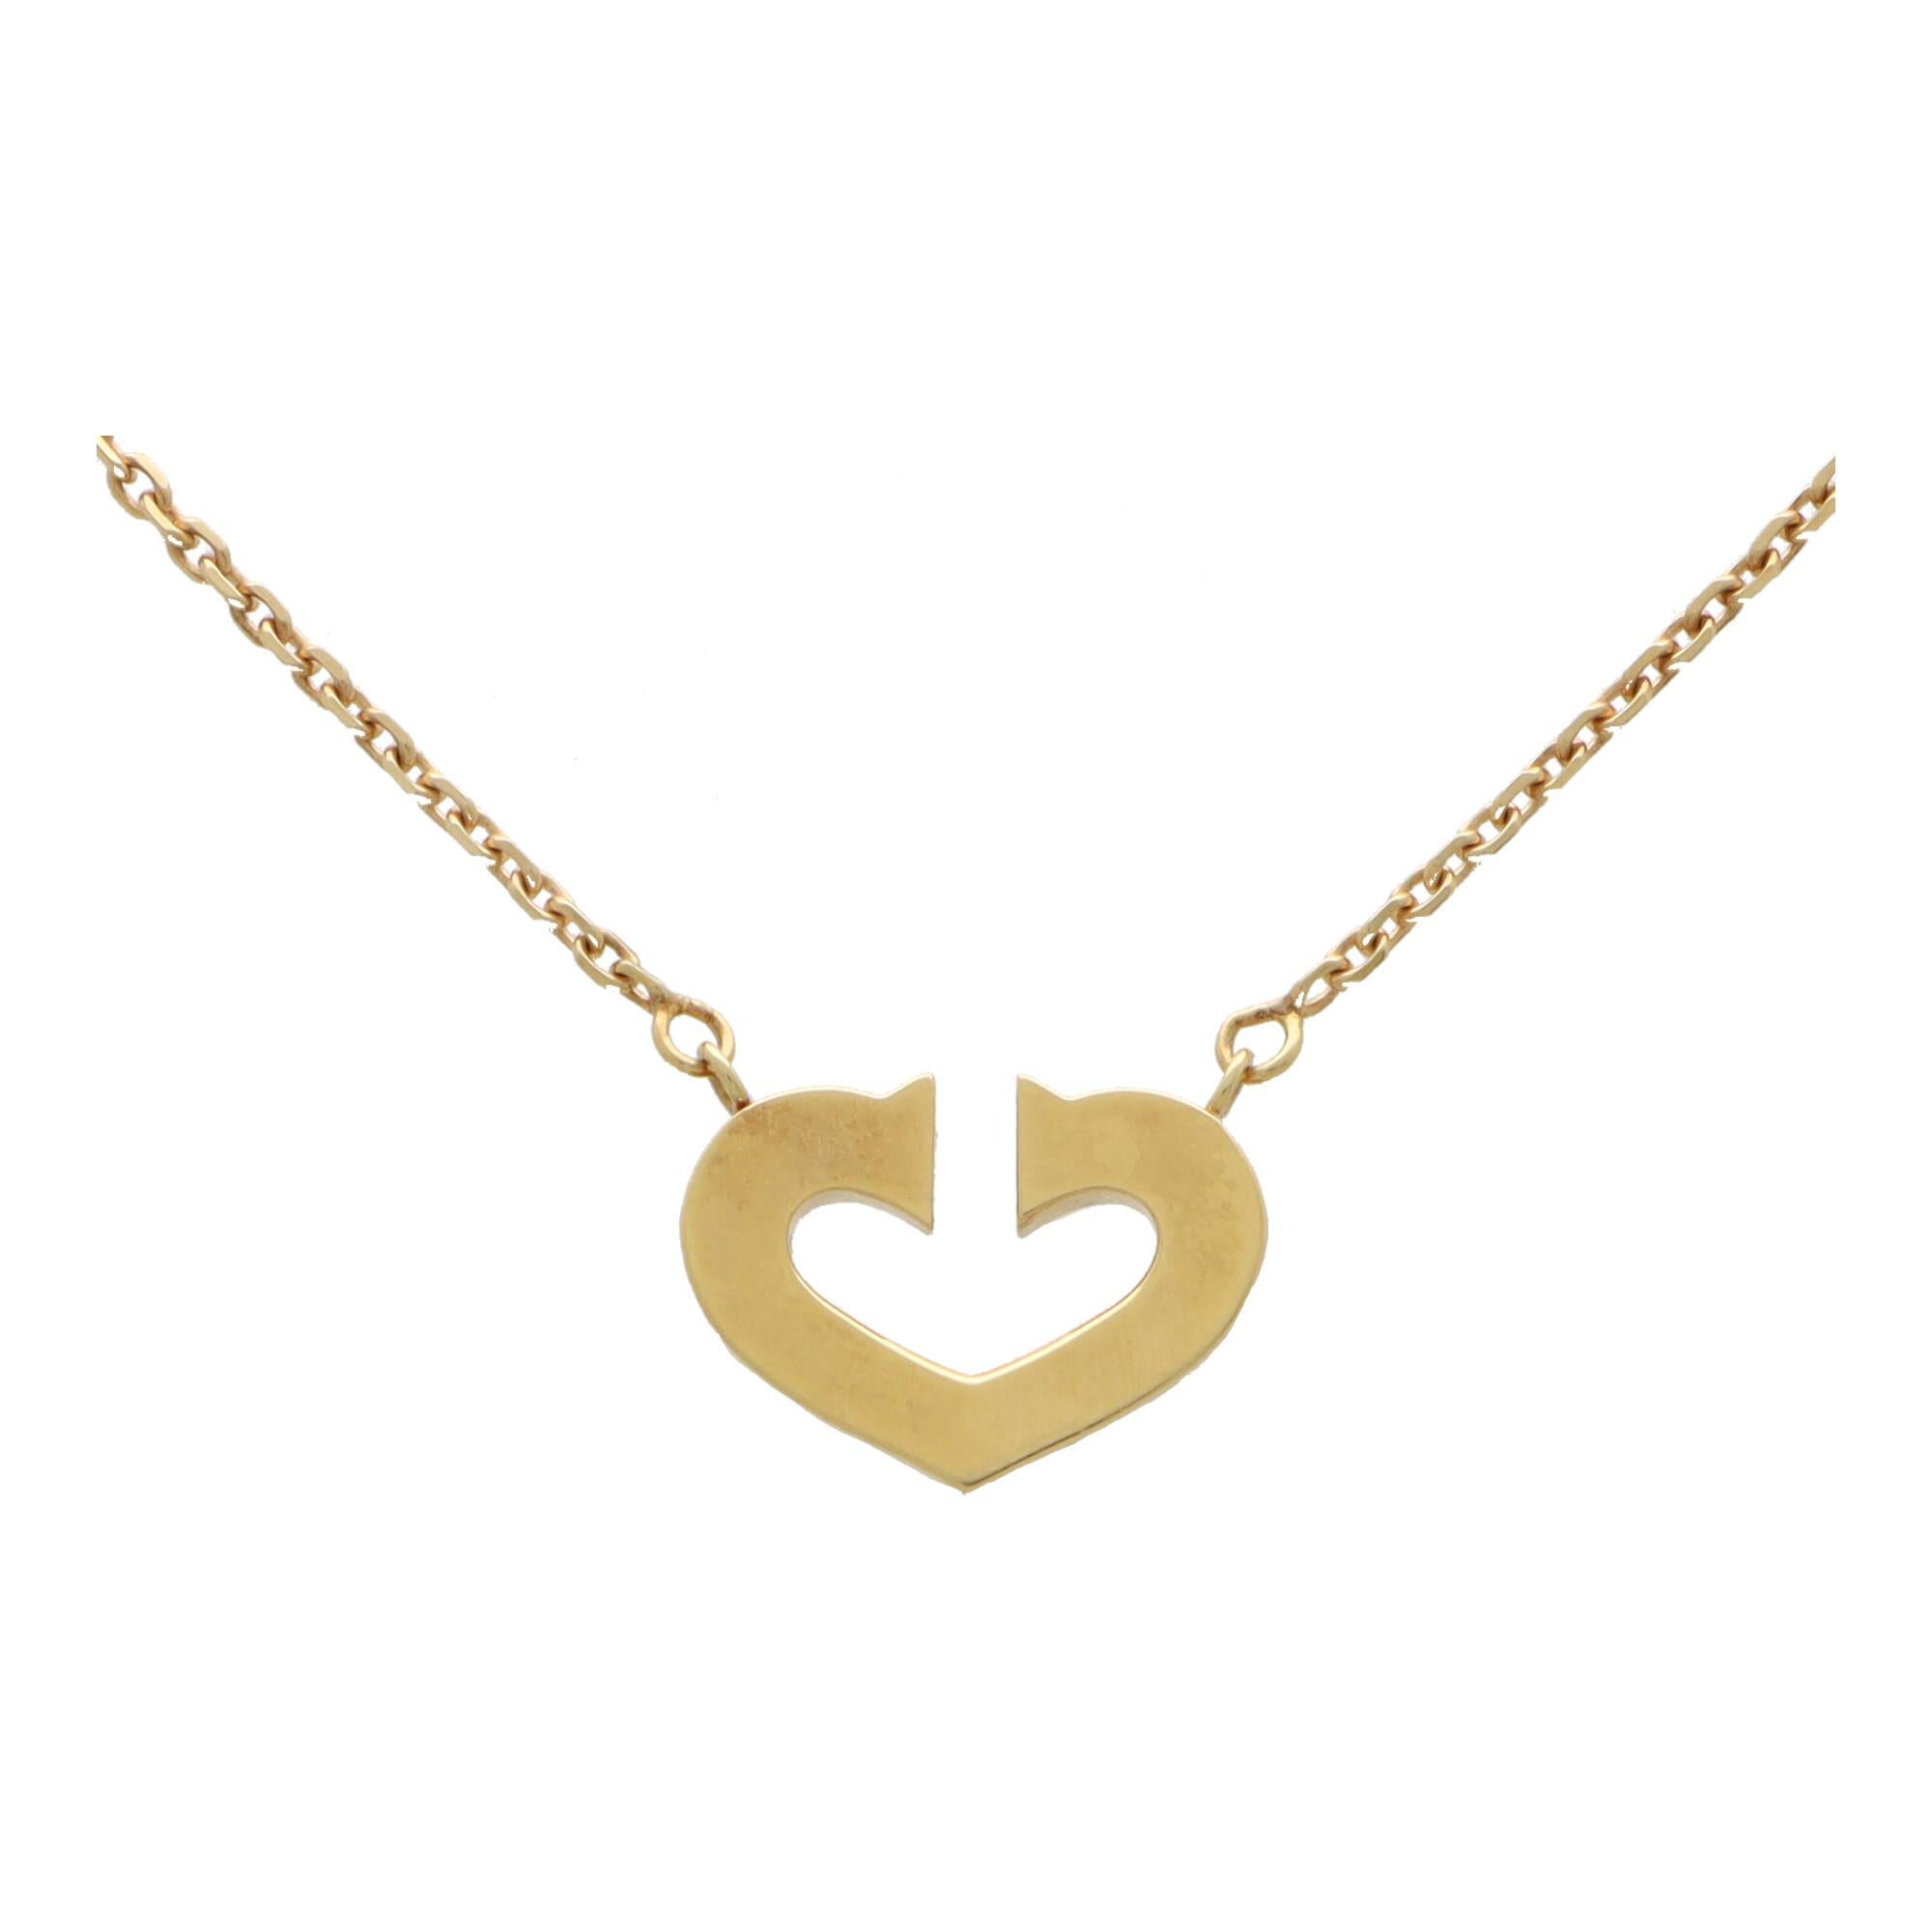 A beautiful vintage Cartier open double C heart pendant set in 18k yellow gold.

The necklace solely features the iconic double C heart motif and hangs from a fine yellow gold trace chain. The necklace is securely fastened with a claps and added